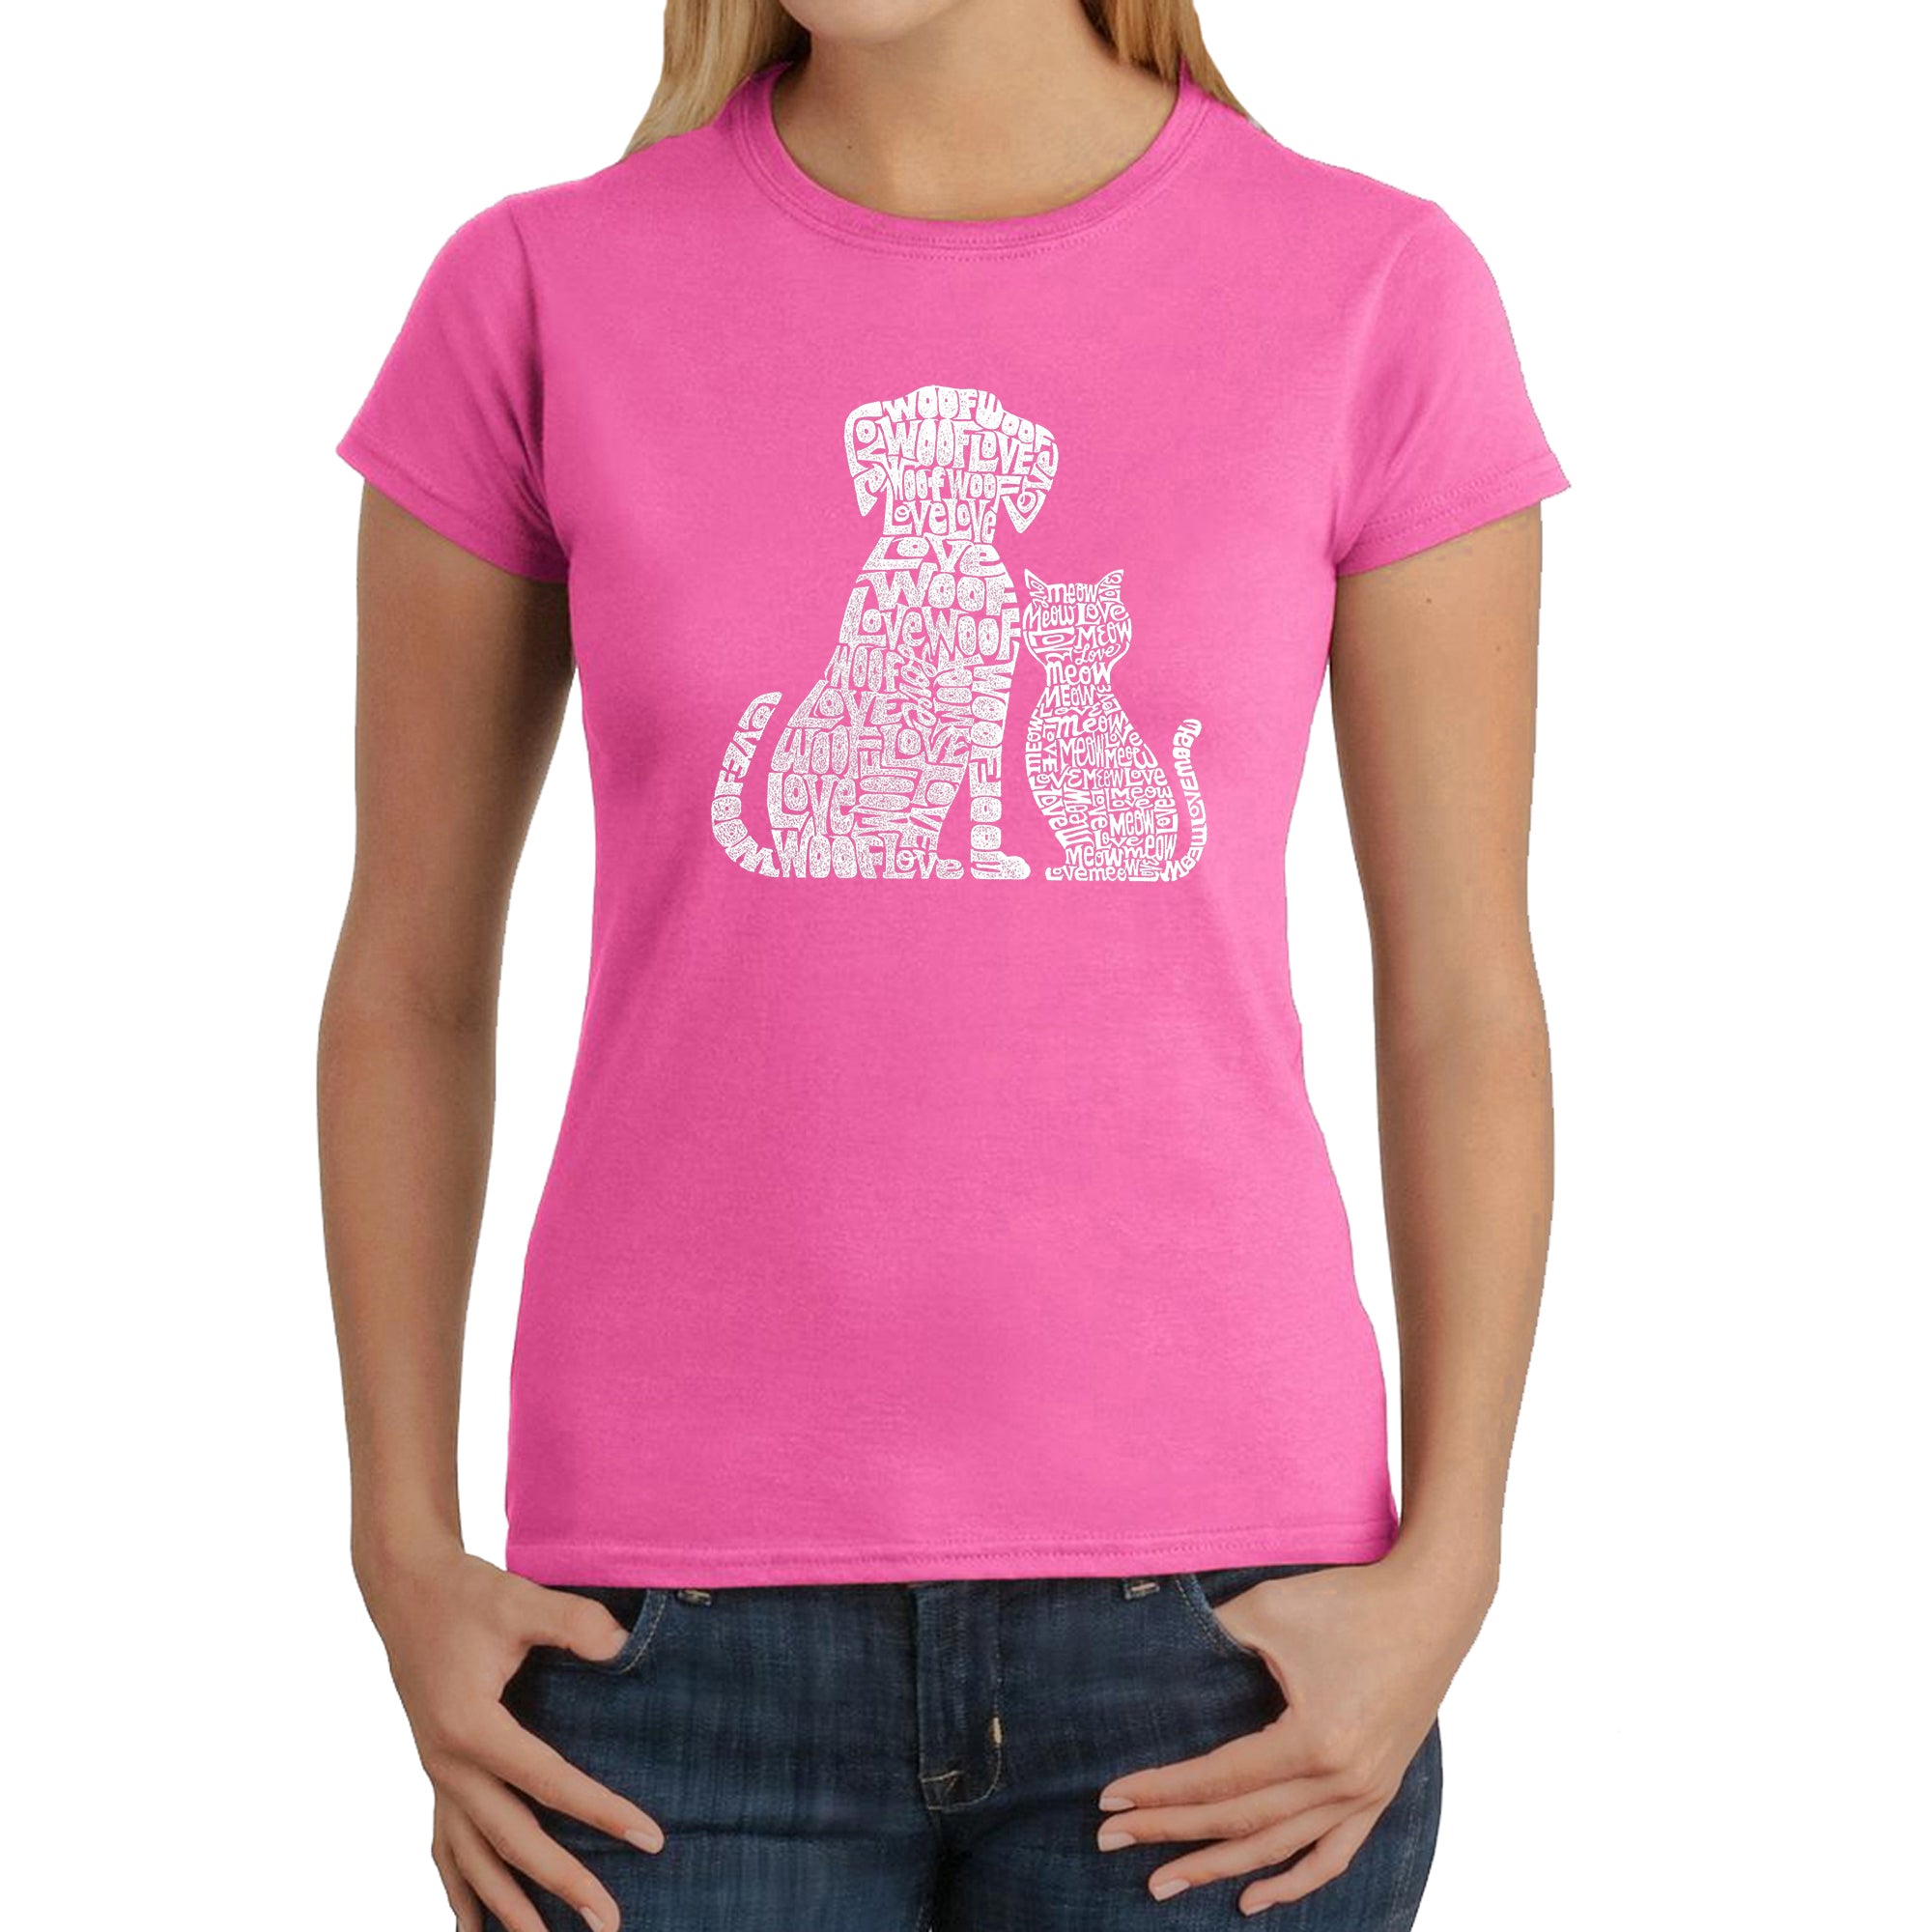 Dogs And Cats - Women's Word Art T-Shirt - Pink - XS